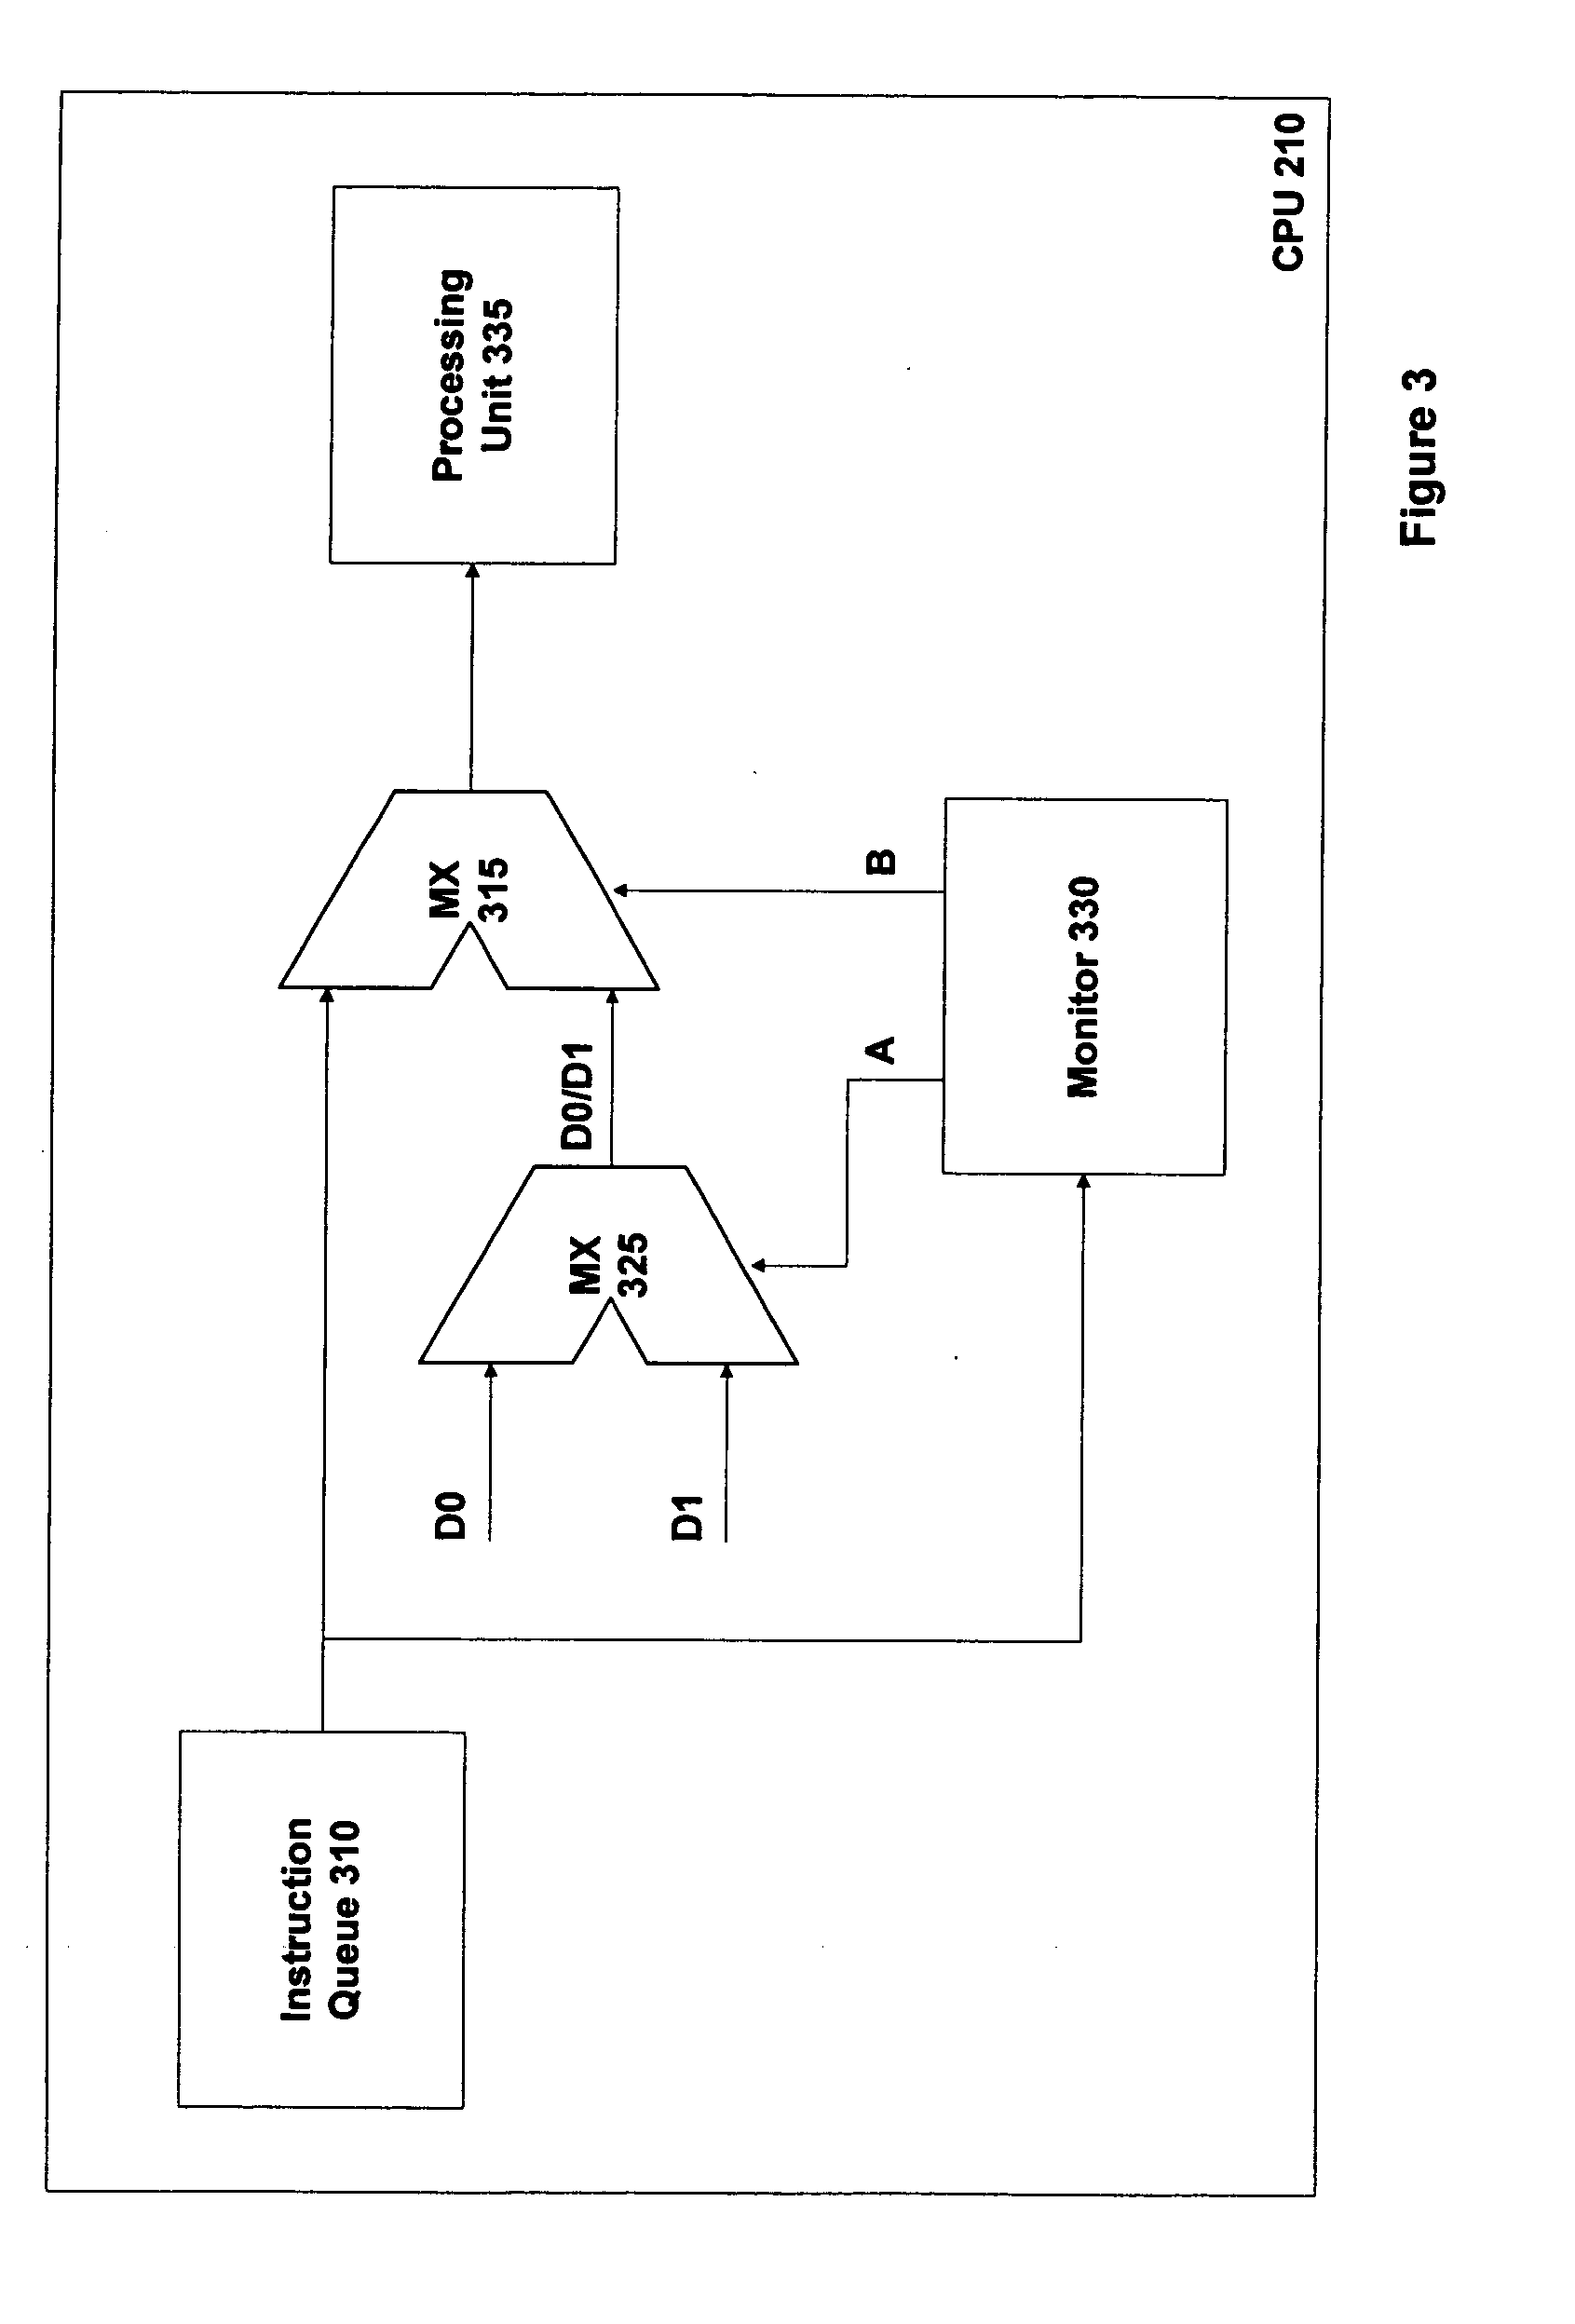 Method and apparatus for controlling the power consumption of a semiconductor device